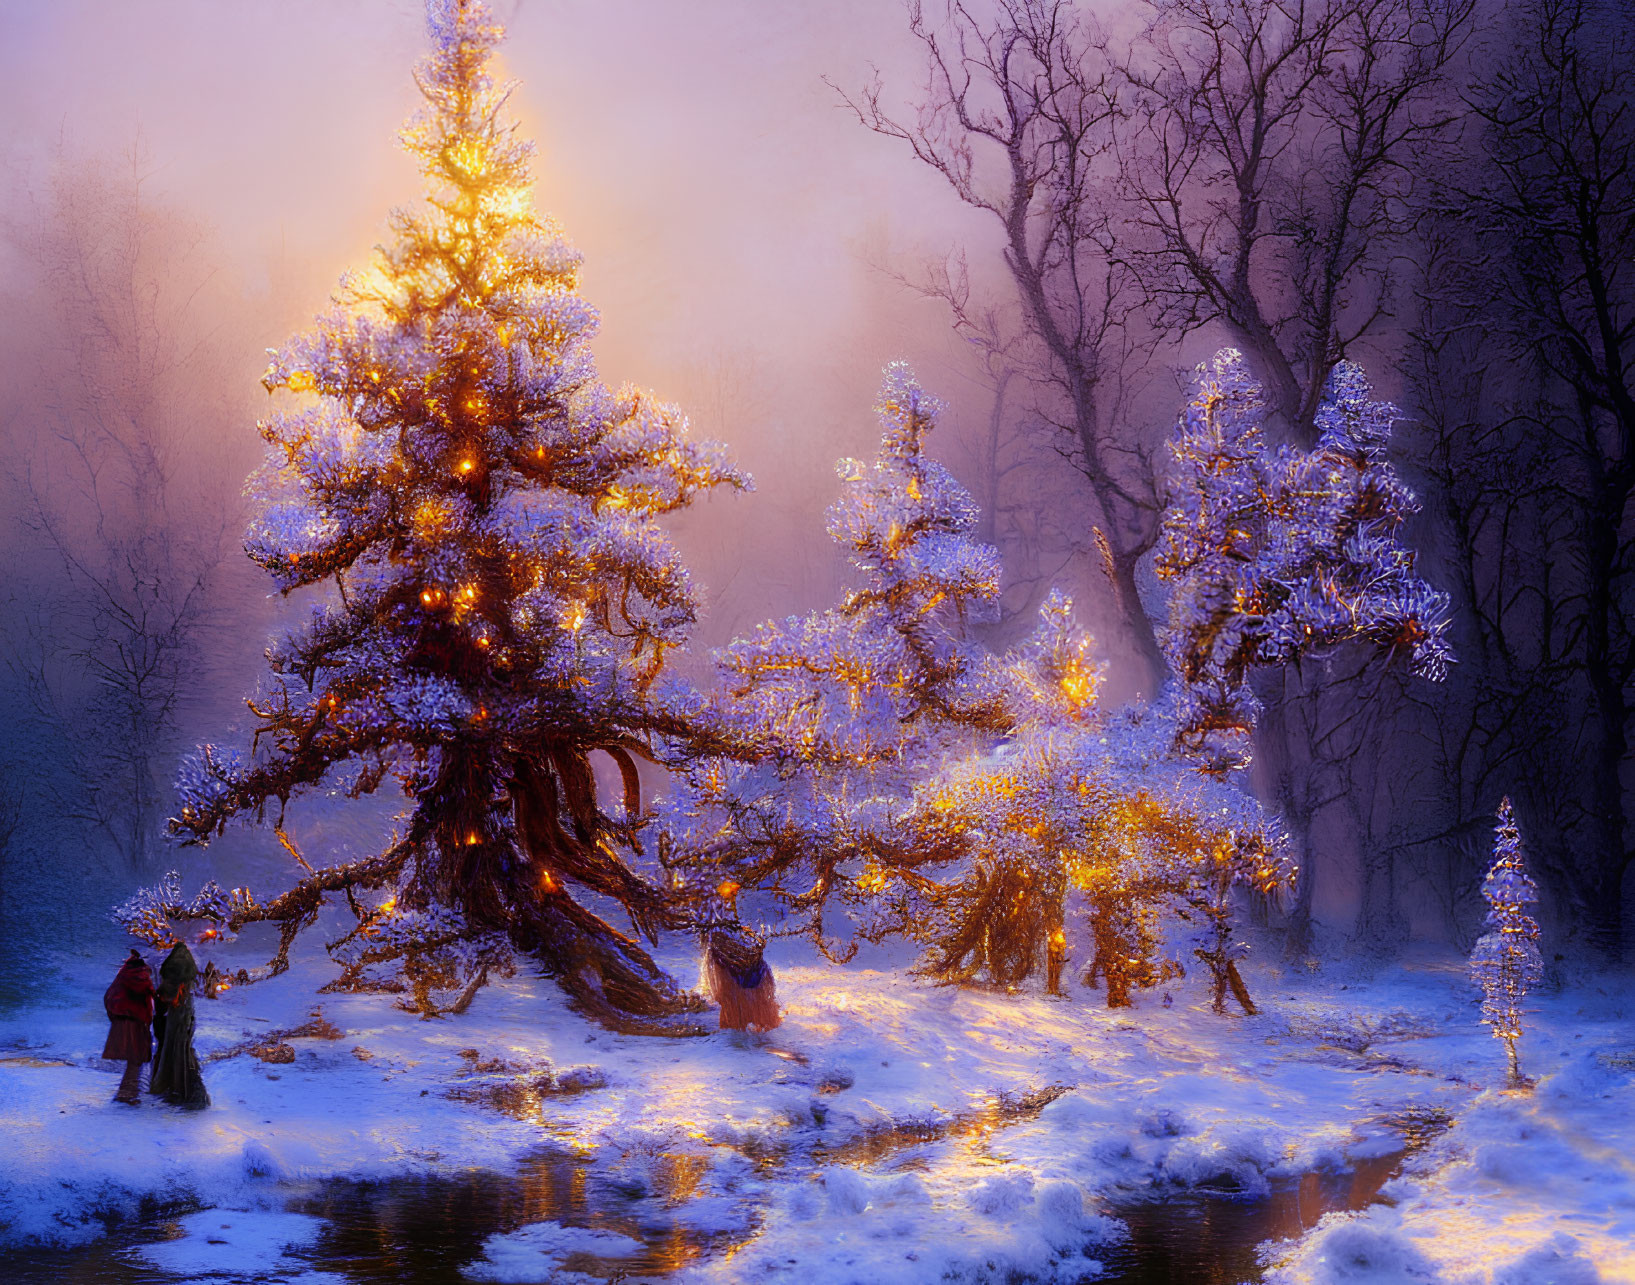 Snow-covered ground and illuminated trees in misty winter forest scene